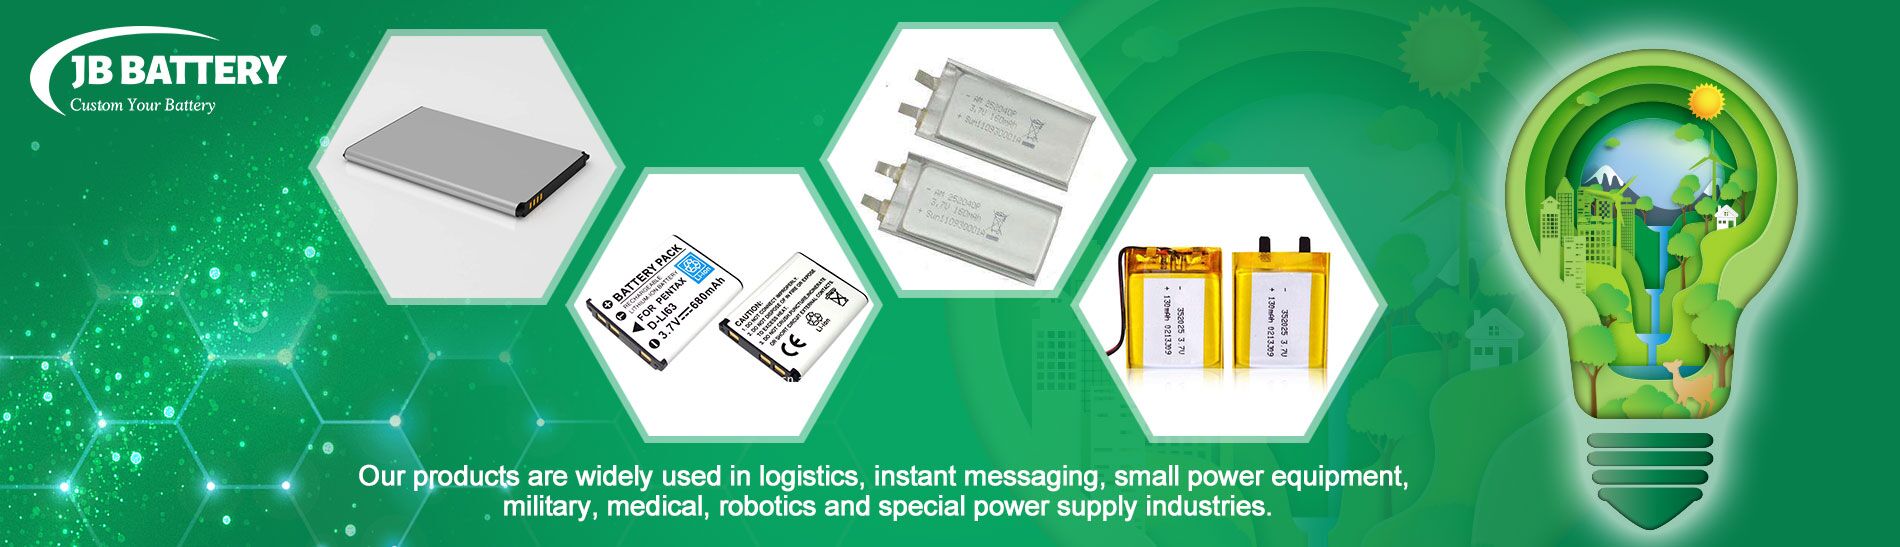 Huizhou JB Battery Technology Limited Introduces Long-lasting Custom Lithium-Ion Battery Pack For Various Industries Use With Custom Design